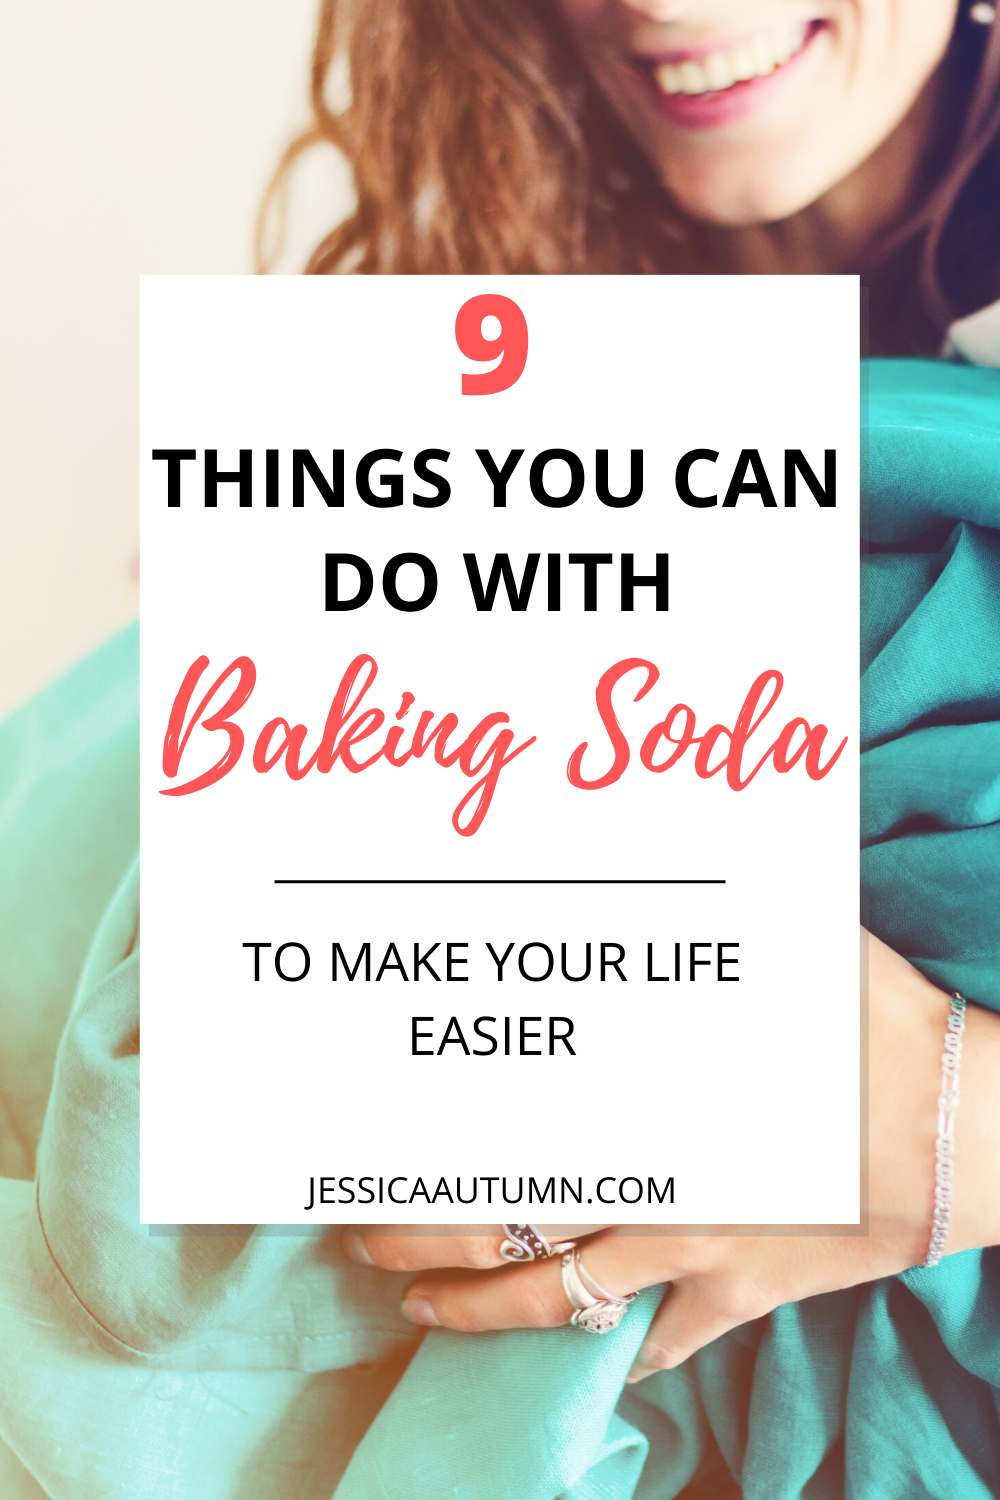 These DIY baking soda hacks for face, teeth whitening, for under eyes, and cleaning are AMAZING! There are so many uses for baking soda every one needs to know. Learn all the tricks and tips to make you like easier now!